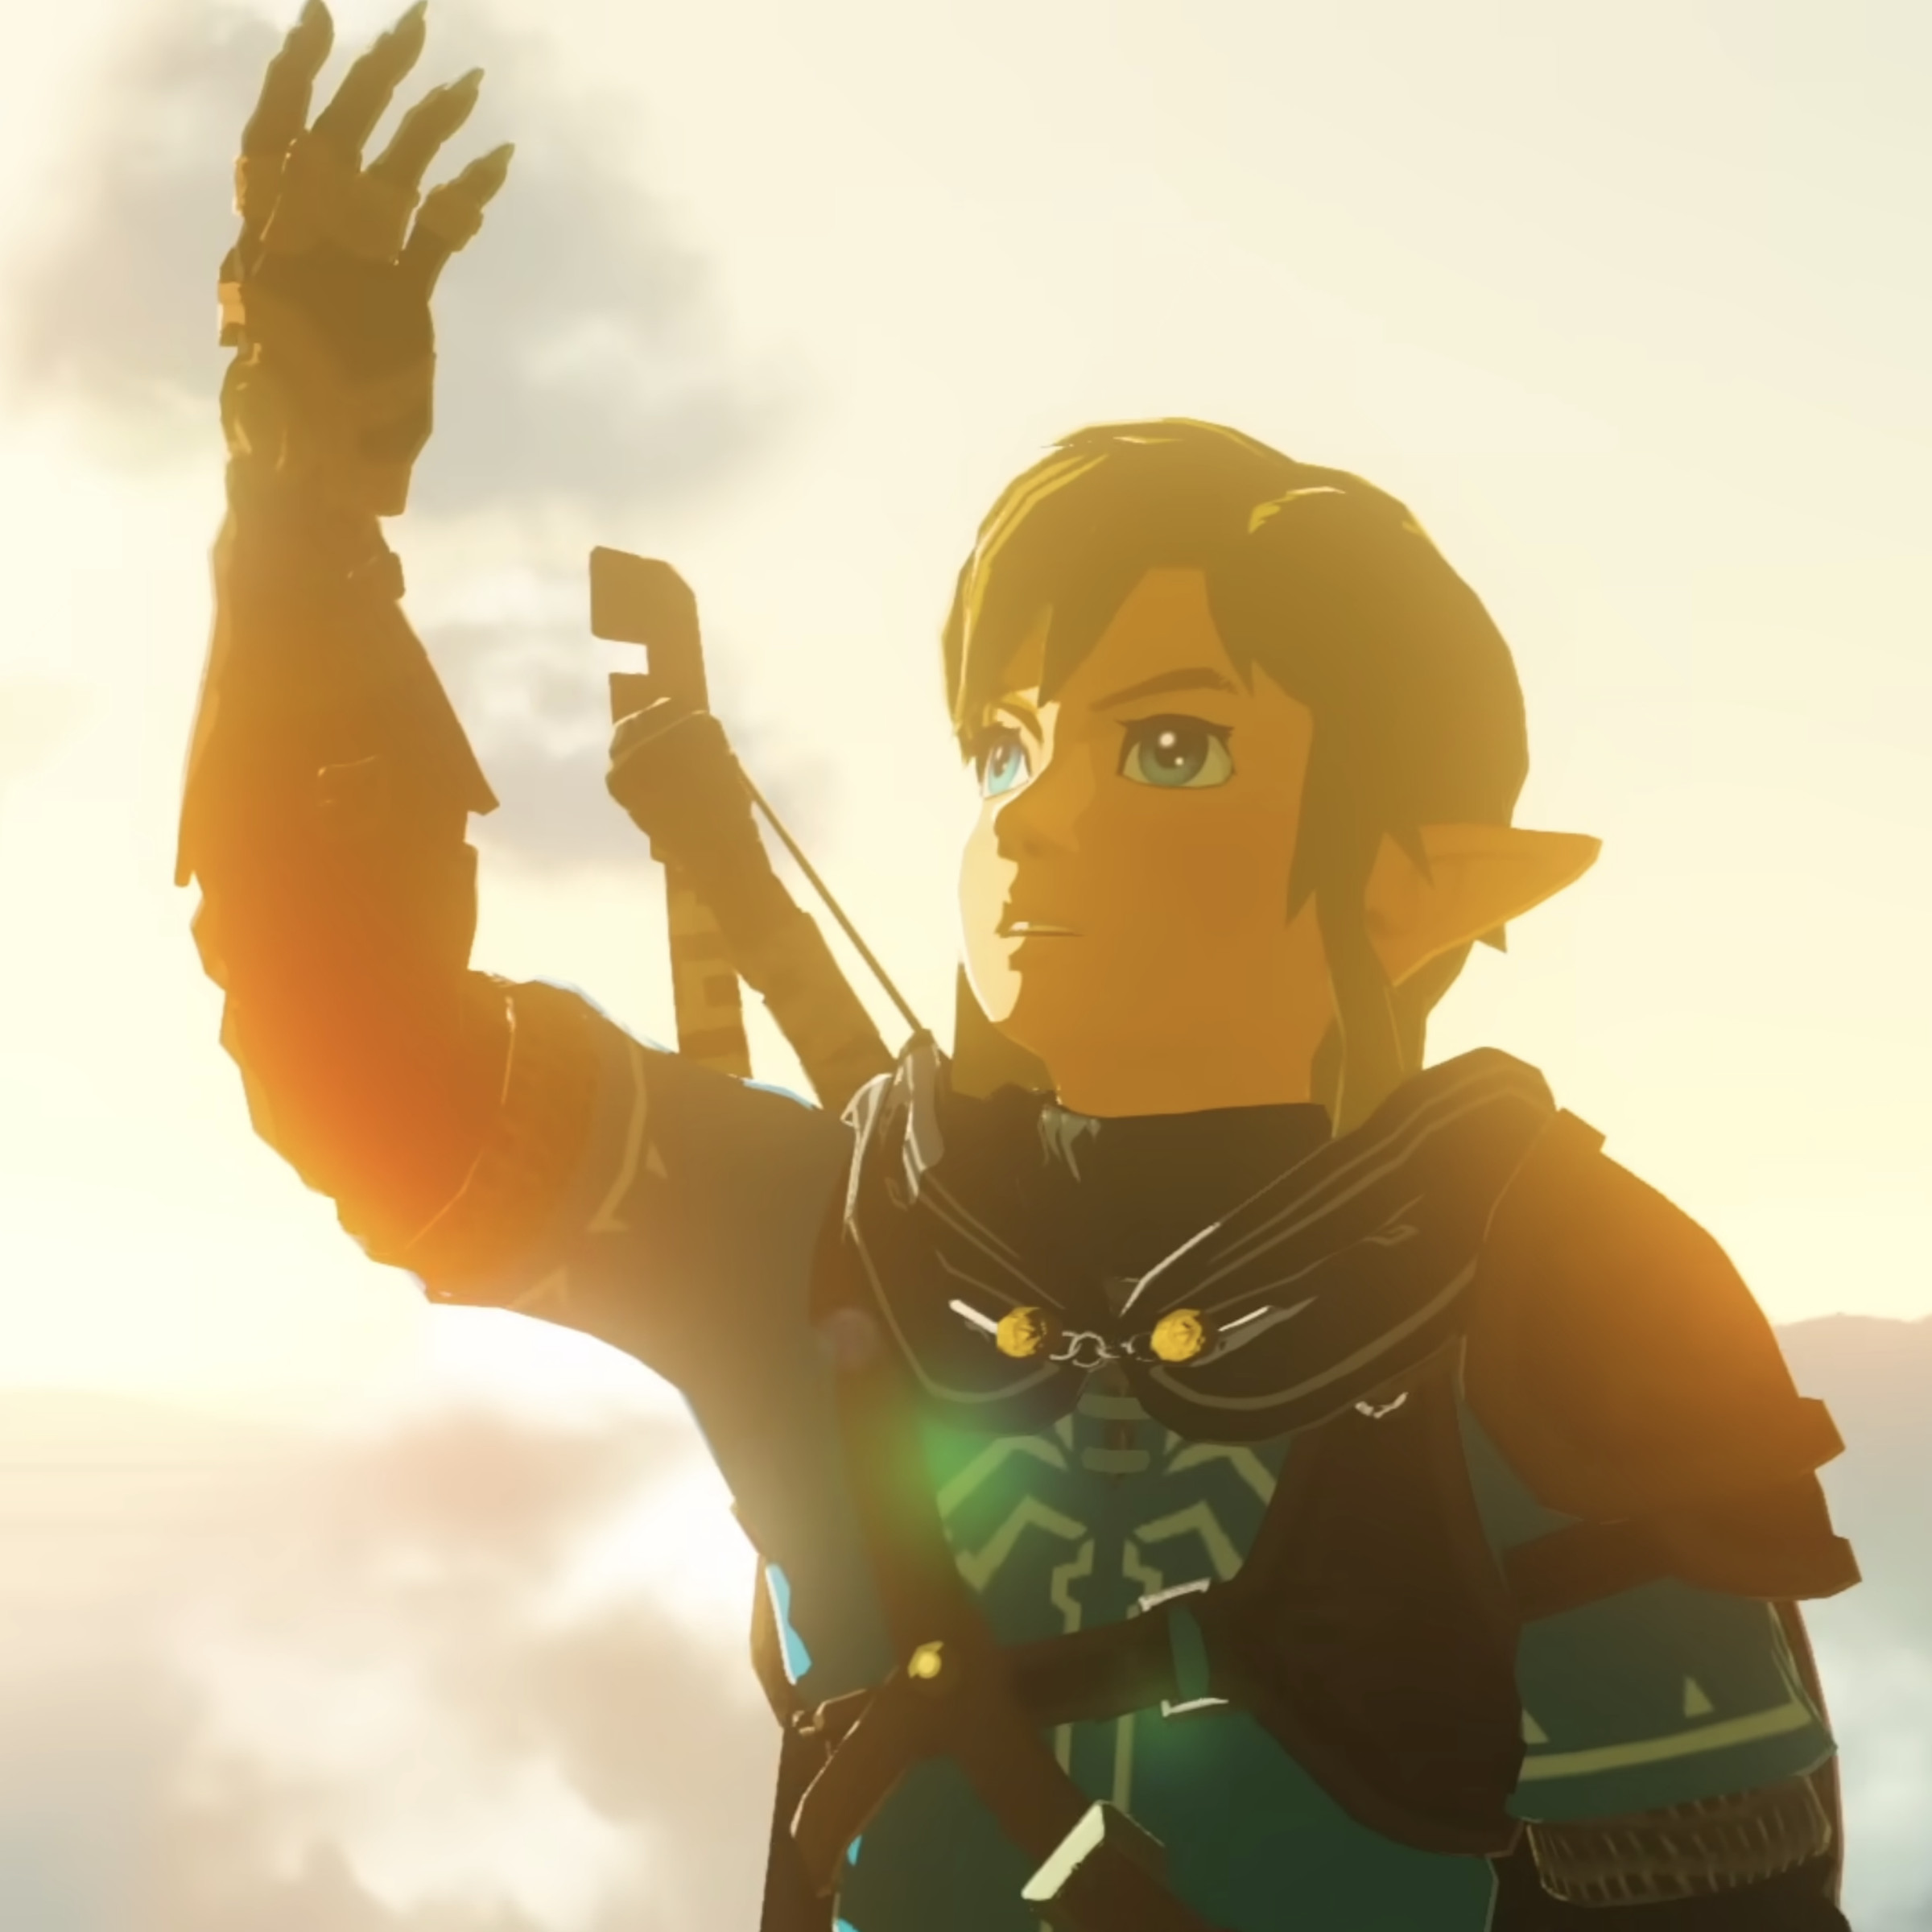 A blonde man with pointed ears wearing a tunic, hood, and a bow holding up his right arm, which appears to be strangely blackened. In the distance, floating islands in the sky are present.